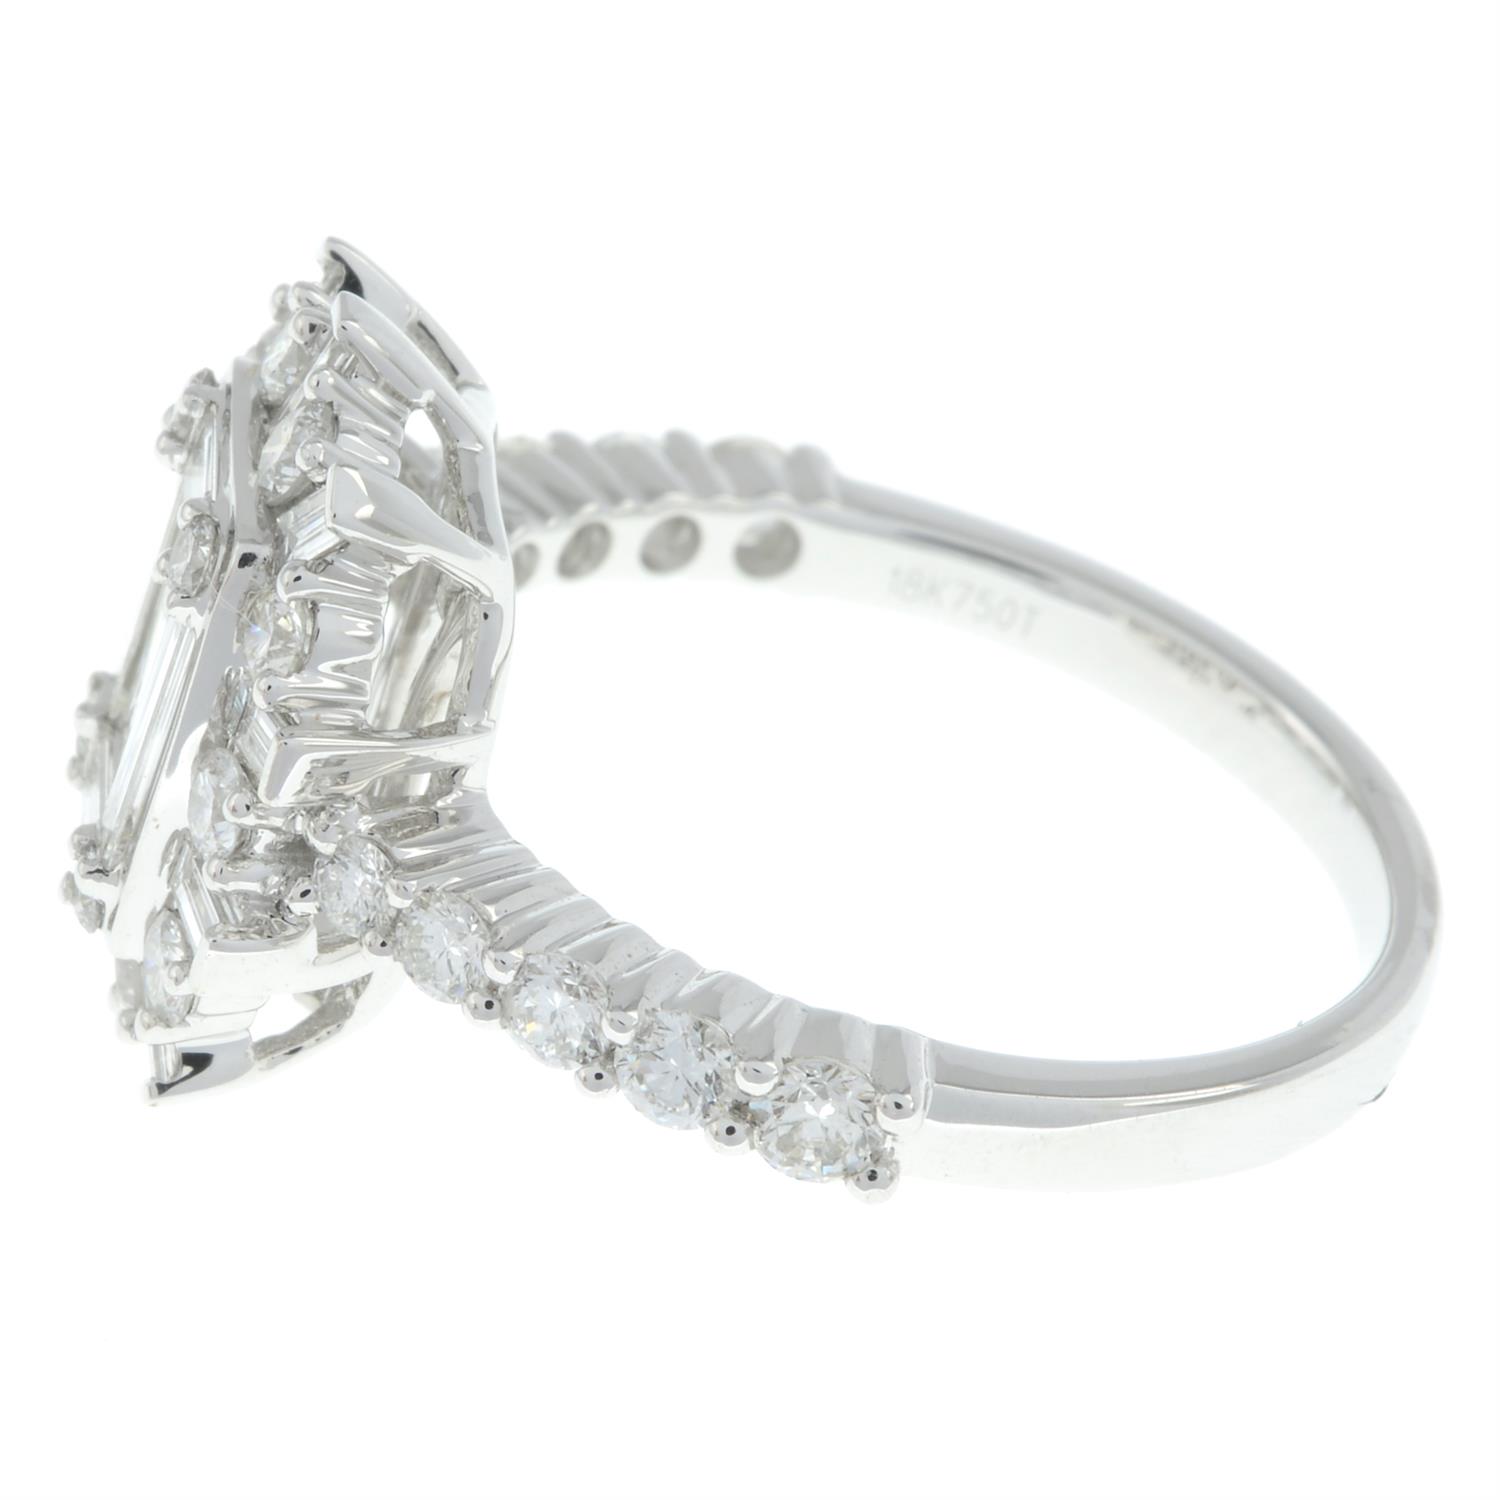 Diamond cluster ring - Image 4 of 6